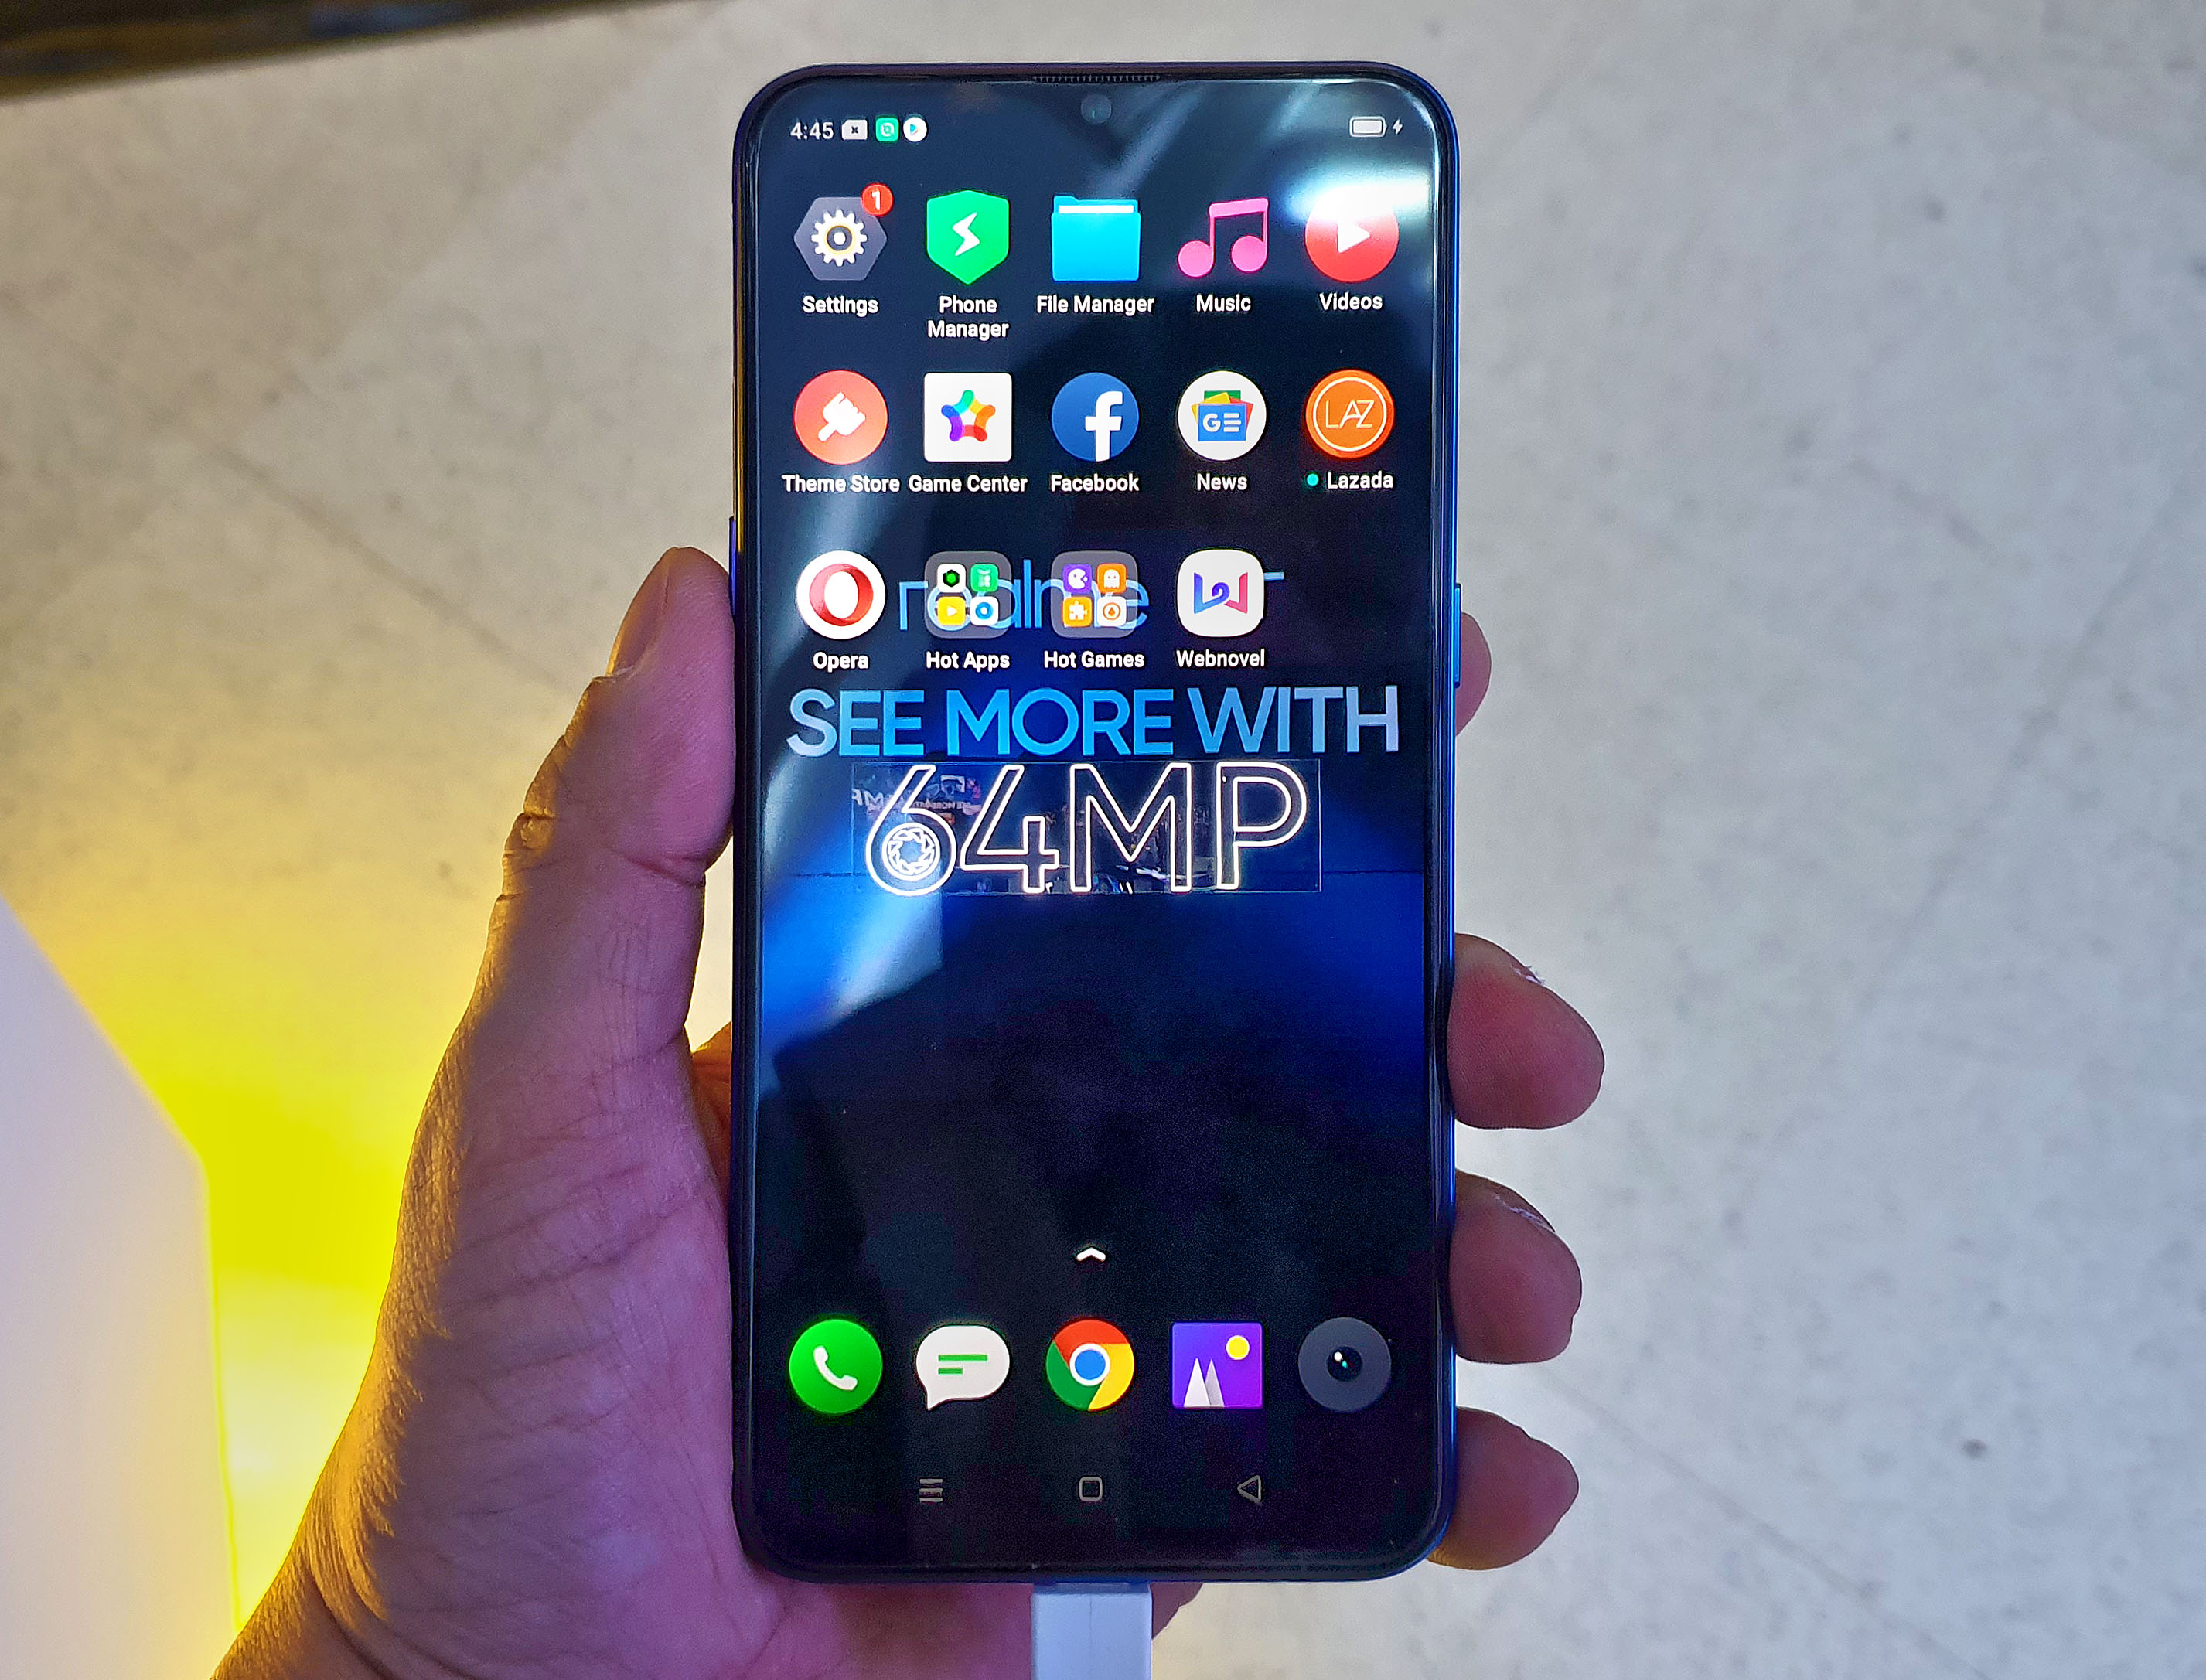 Realme XT with 64MP quad-camera priced at PHP16,990